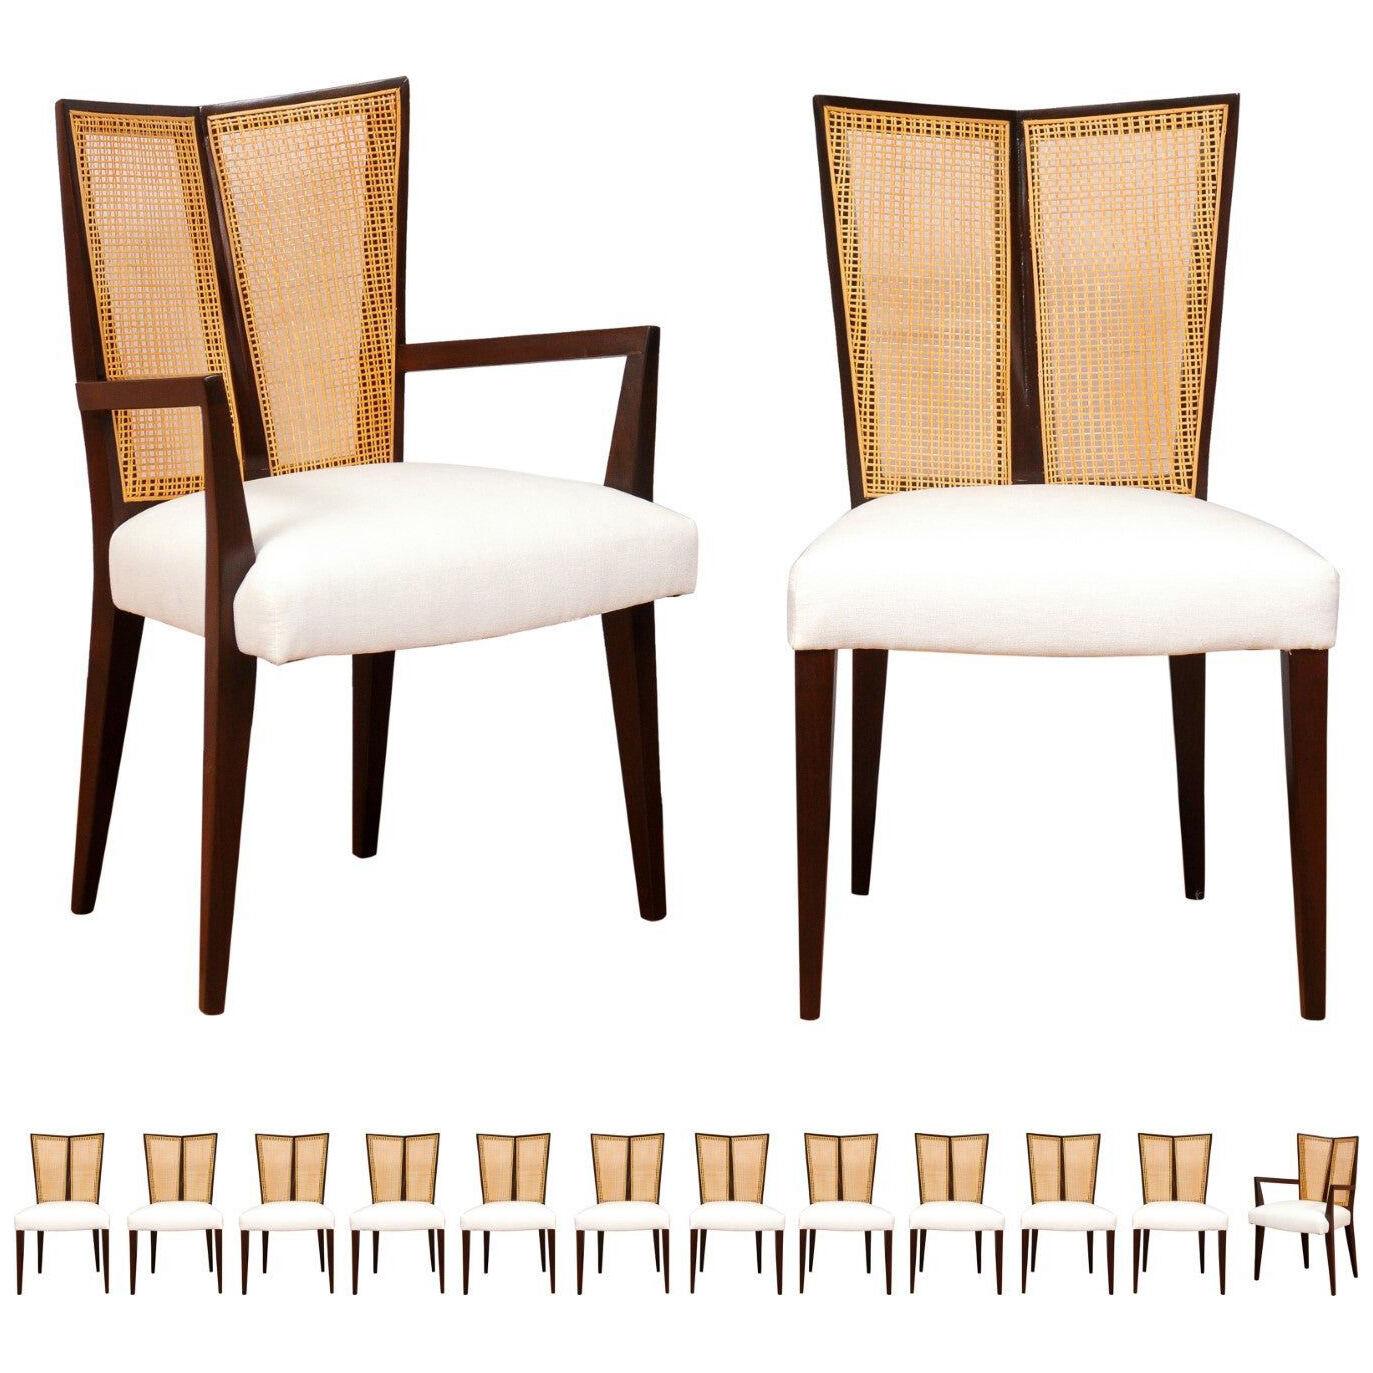 Breathtaking Set of 14 Modern V-Back Cane Chairs by Michael Taylor, circa 1960